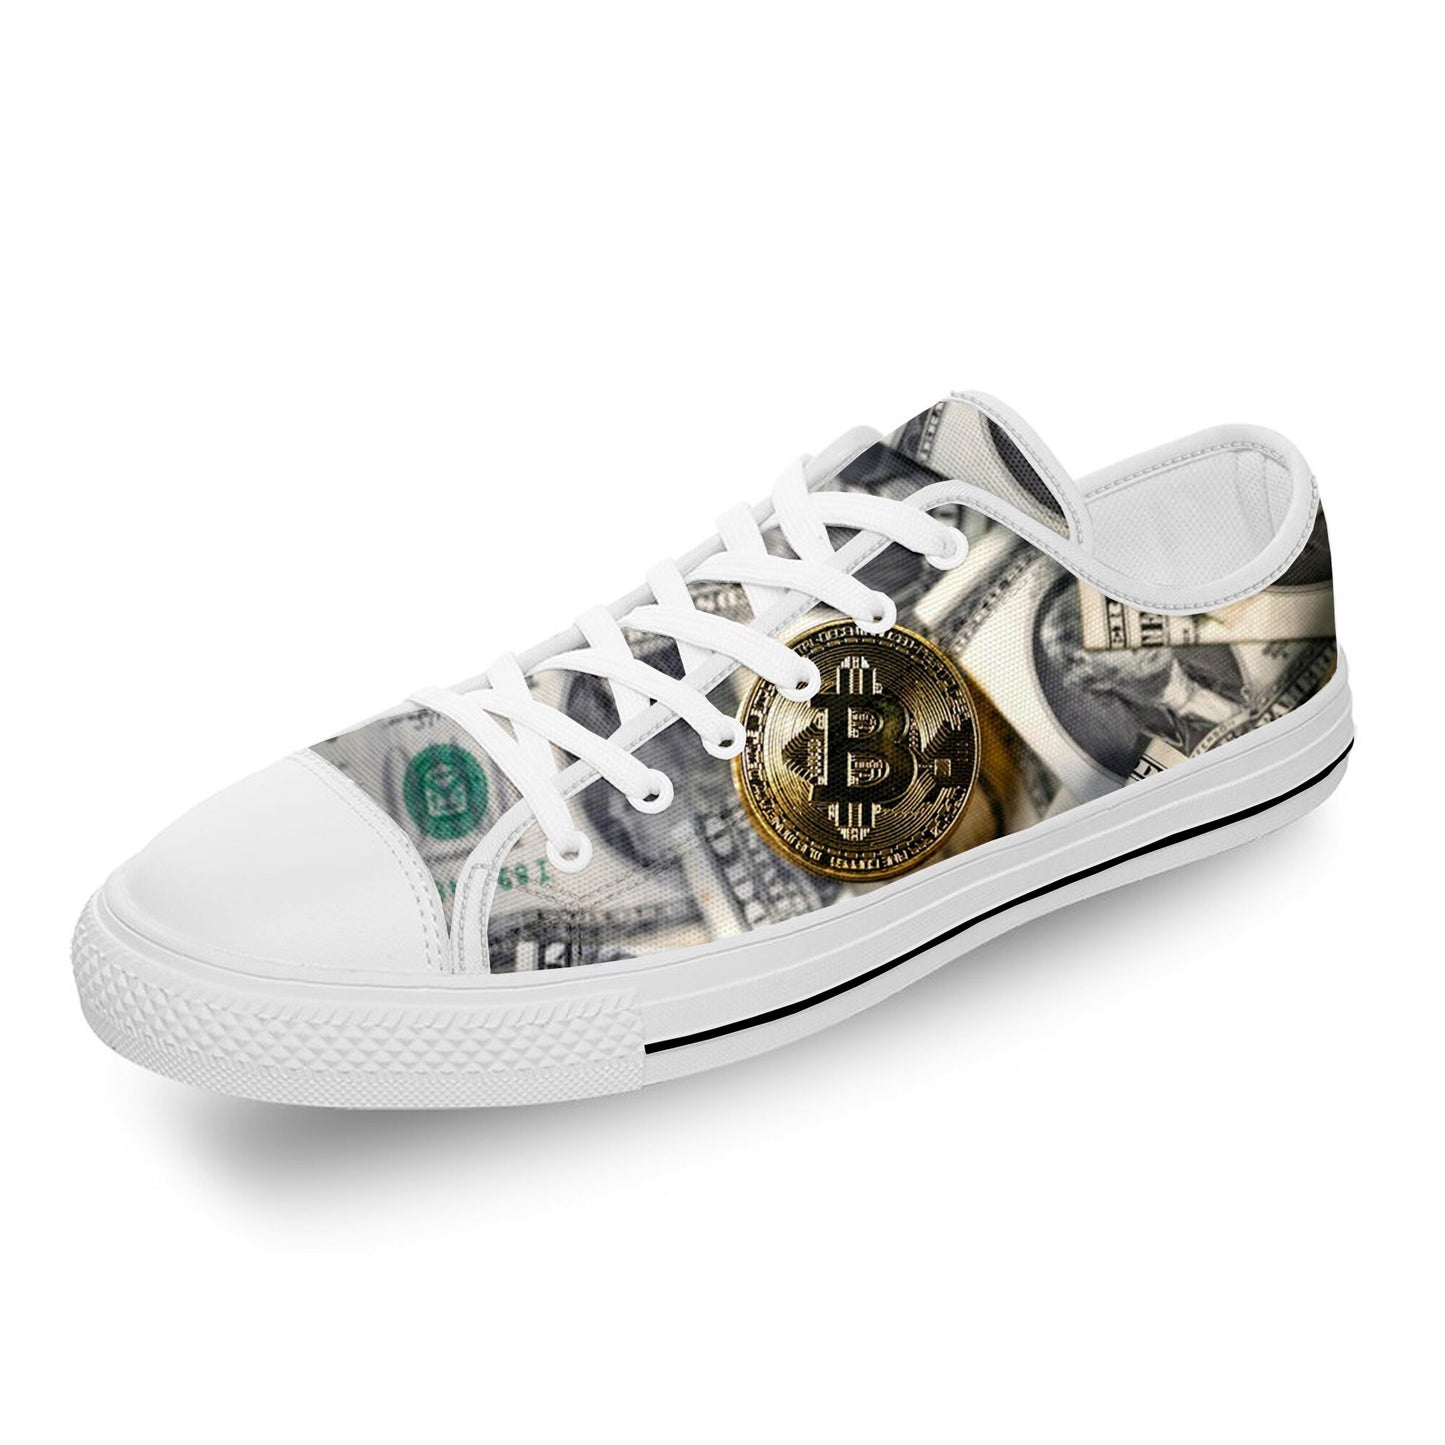 Bitcoin cryptocurrency shoes